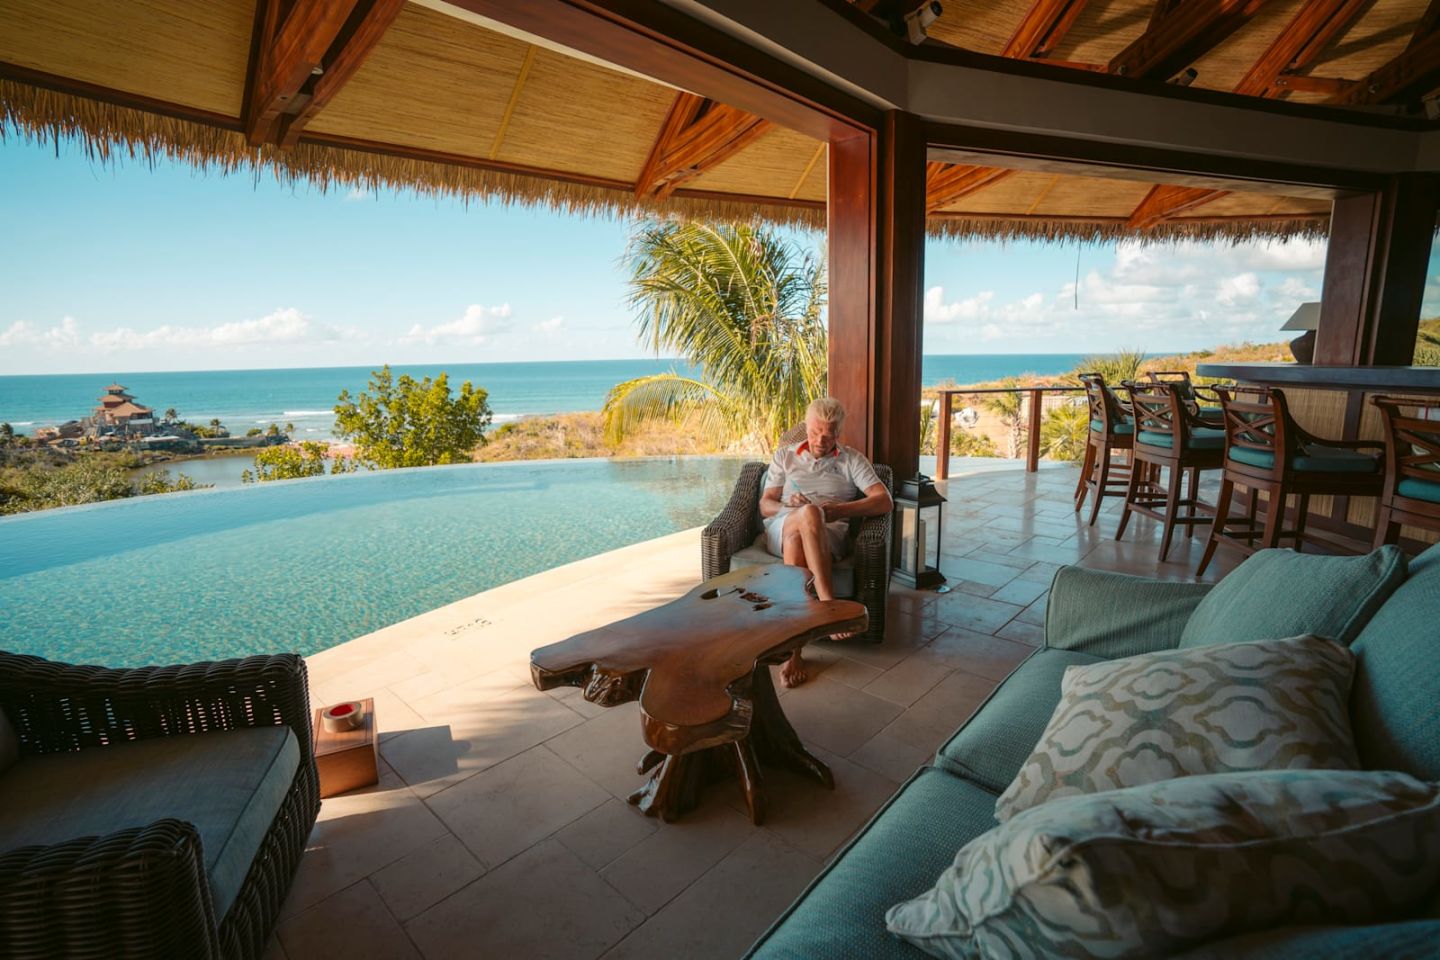 Richard Branson relaxes by the pool on Necker Island